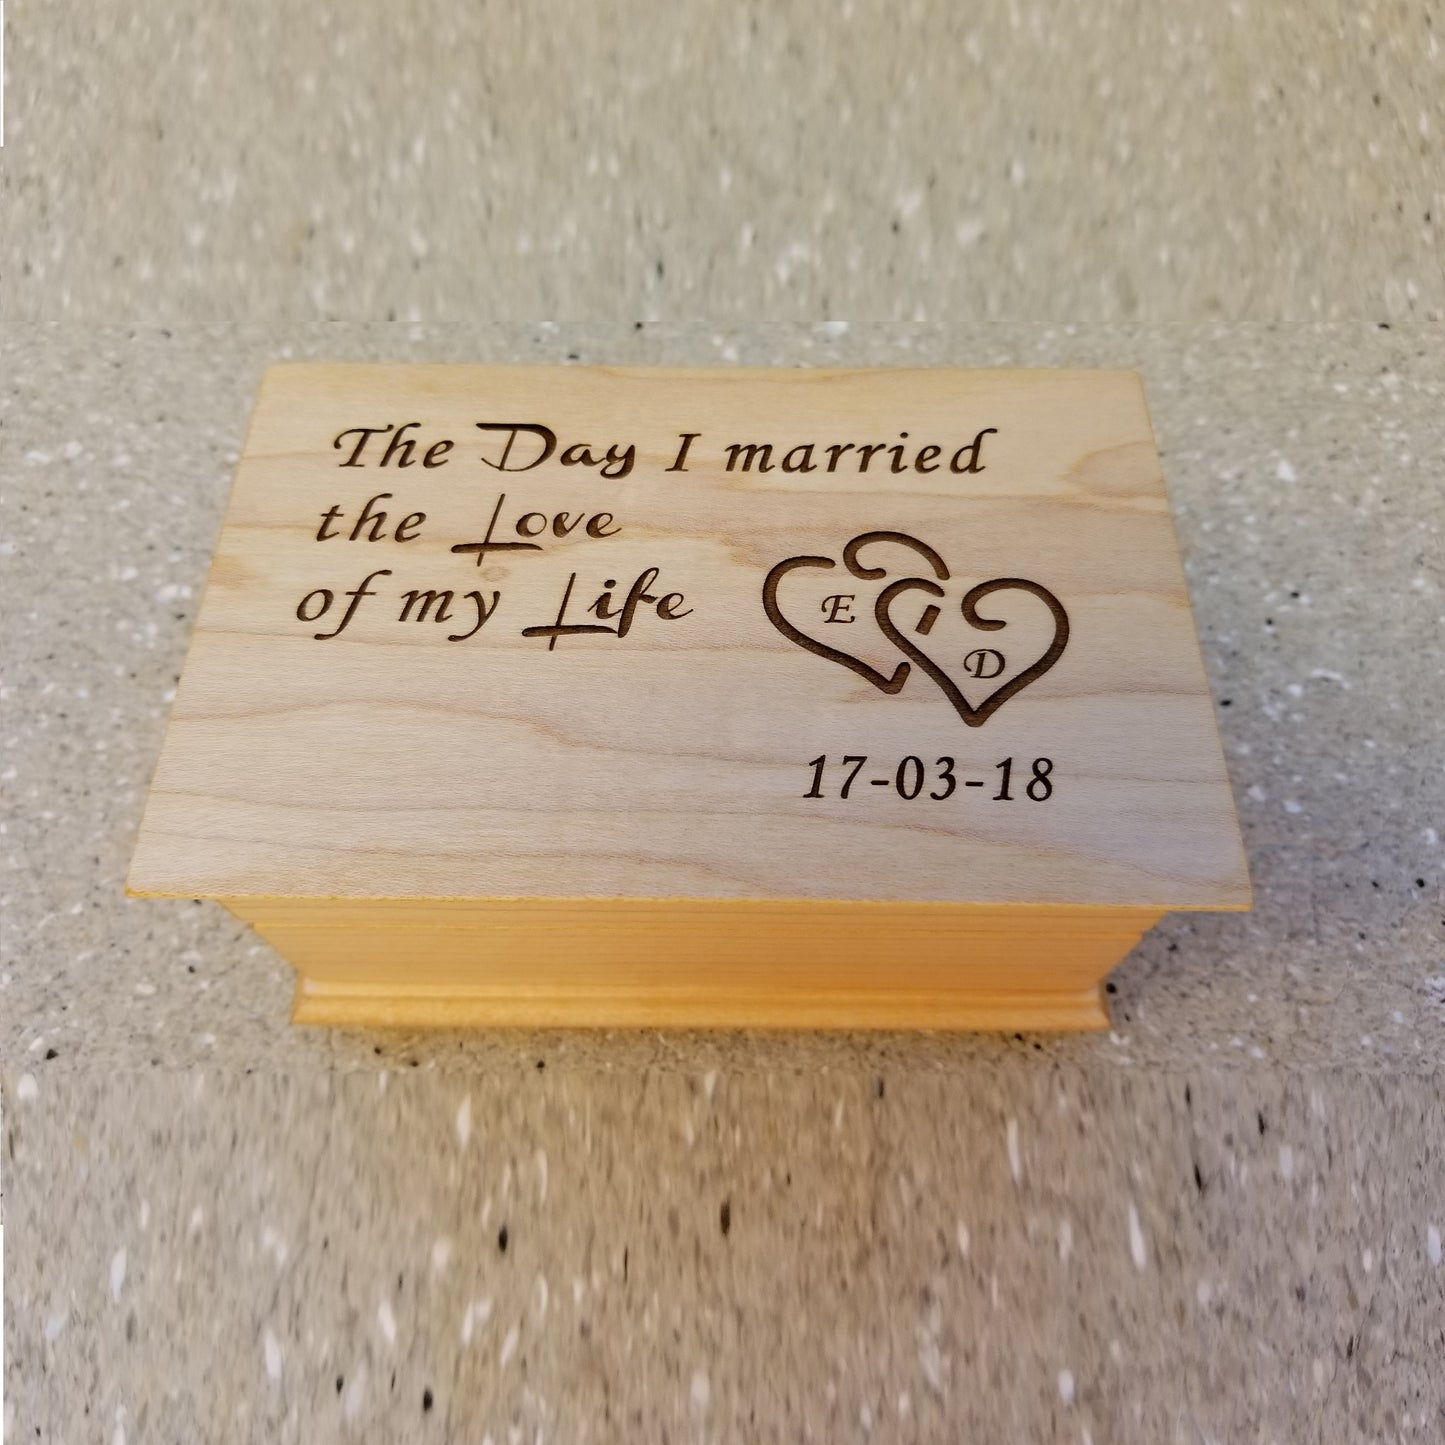 The Day I Married the Love of My Life jewelry box with built in music player